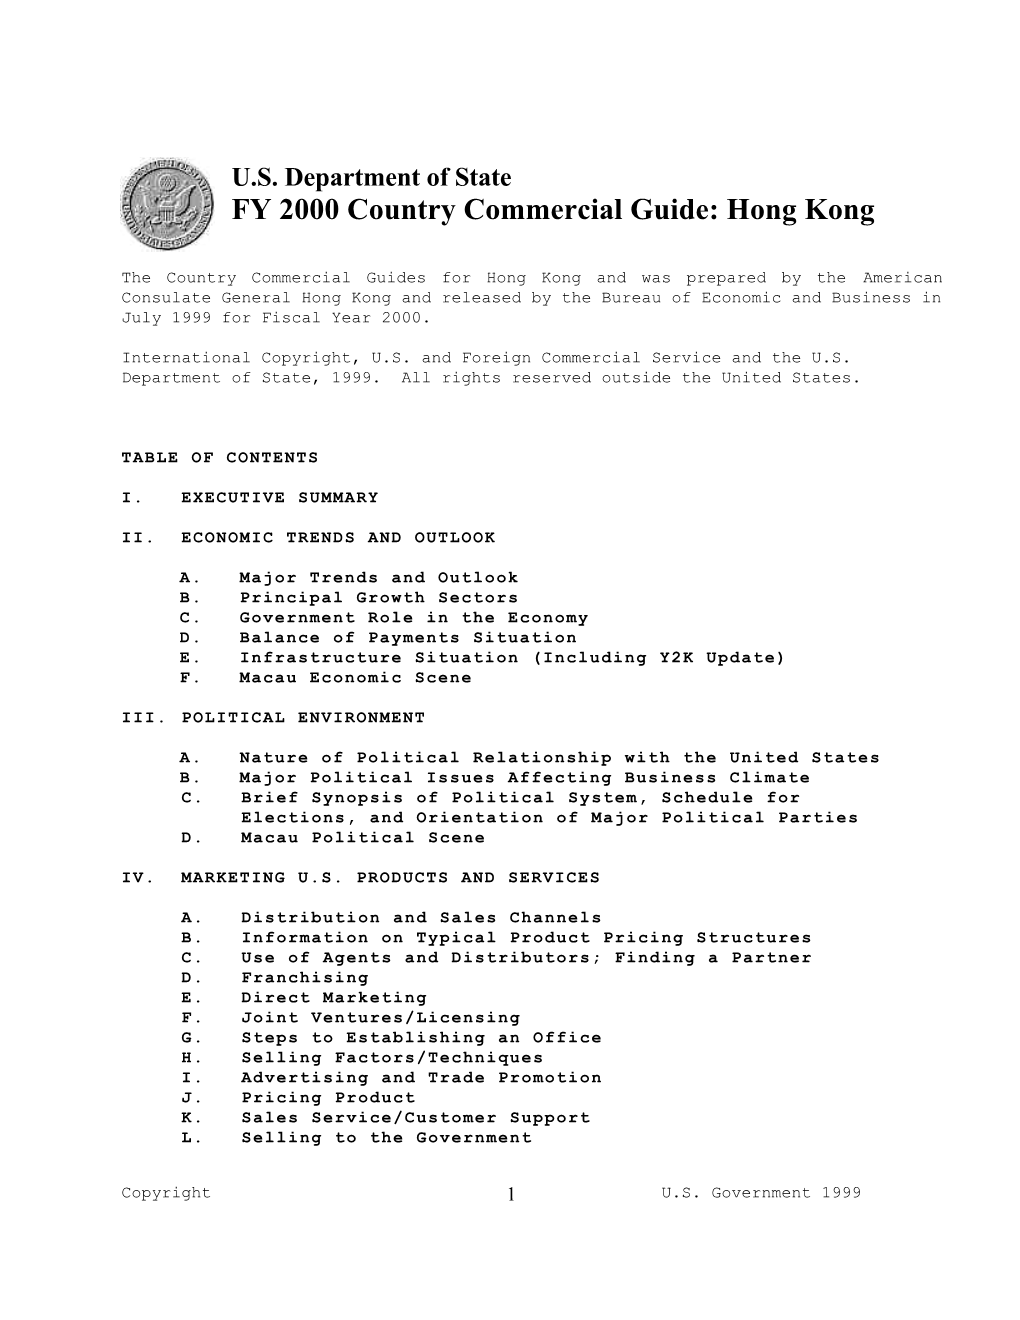 FY 2000 Country Commercial Guide: Hong Kong